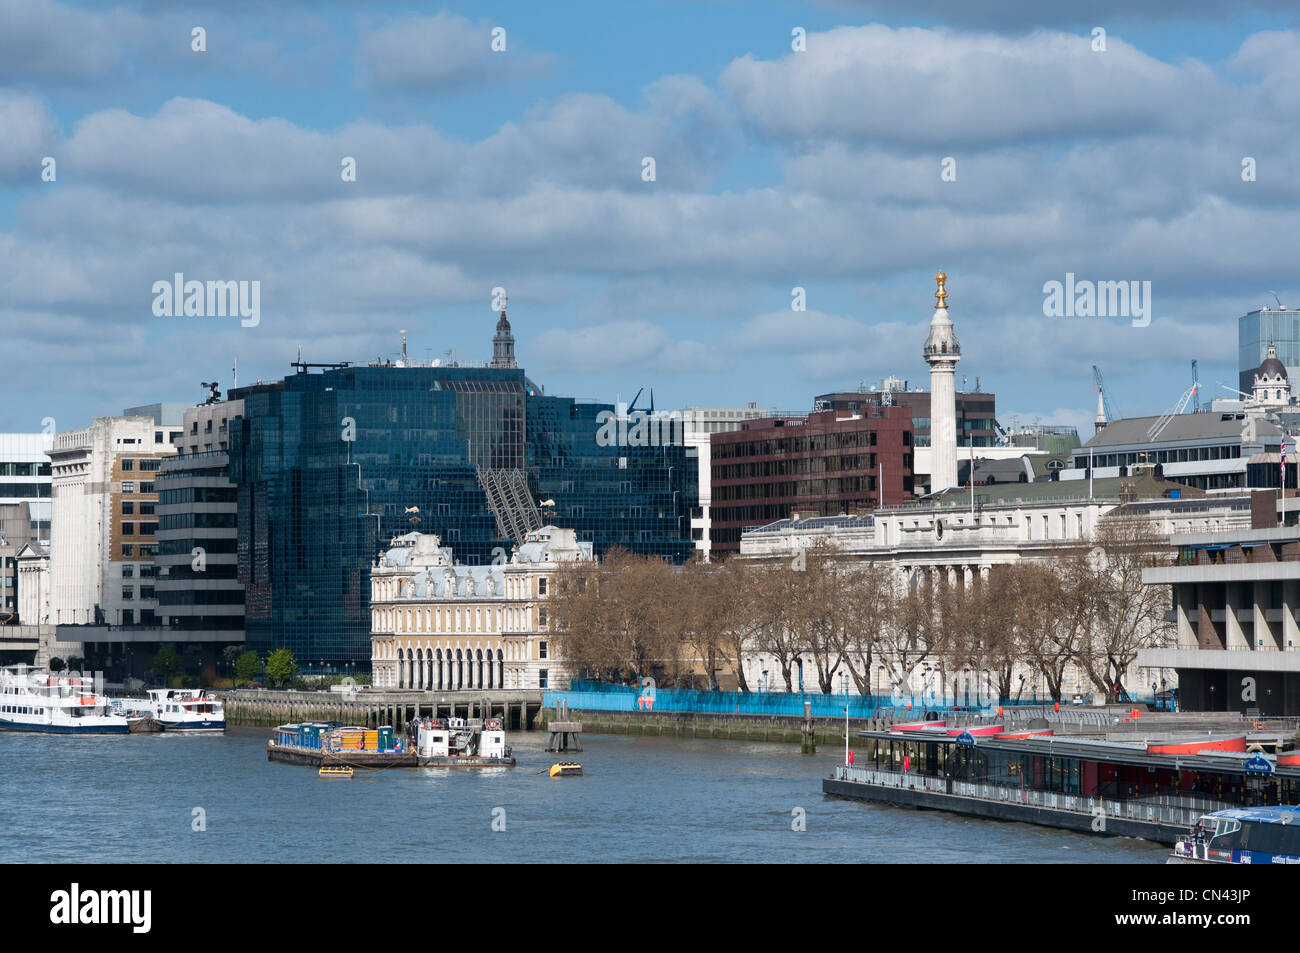 North Bank Of The River Thames High Resolution Stock Photography and ...